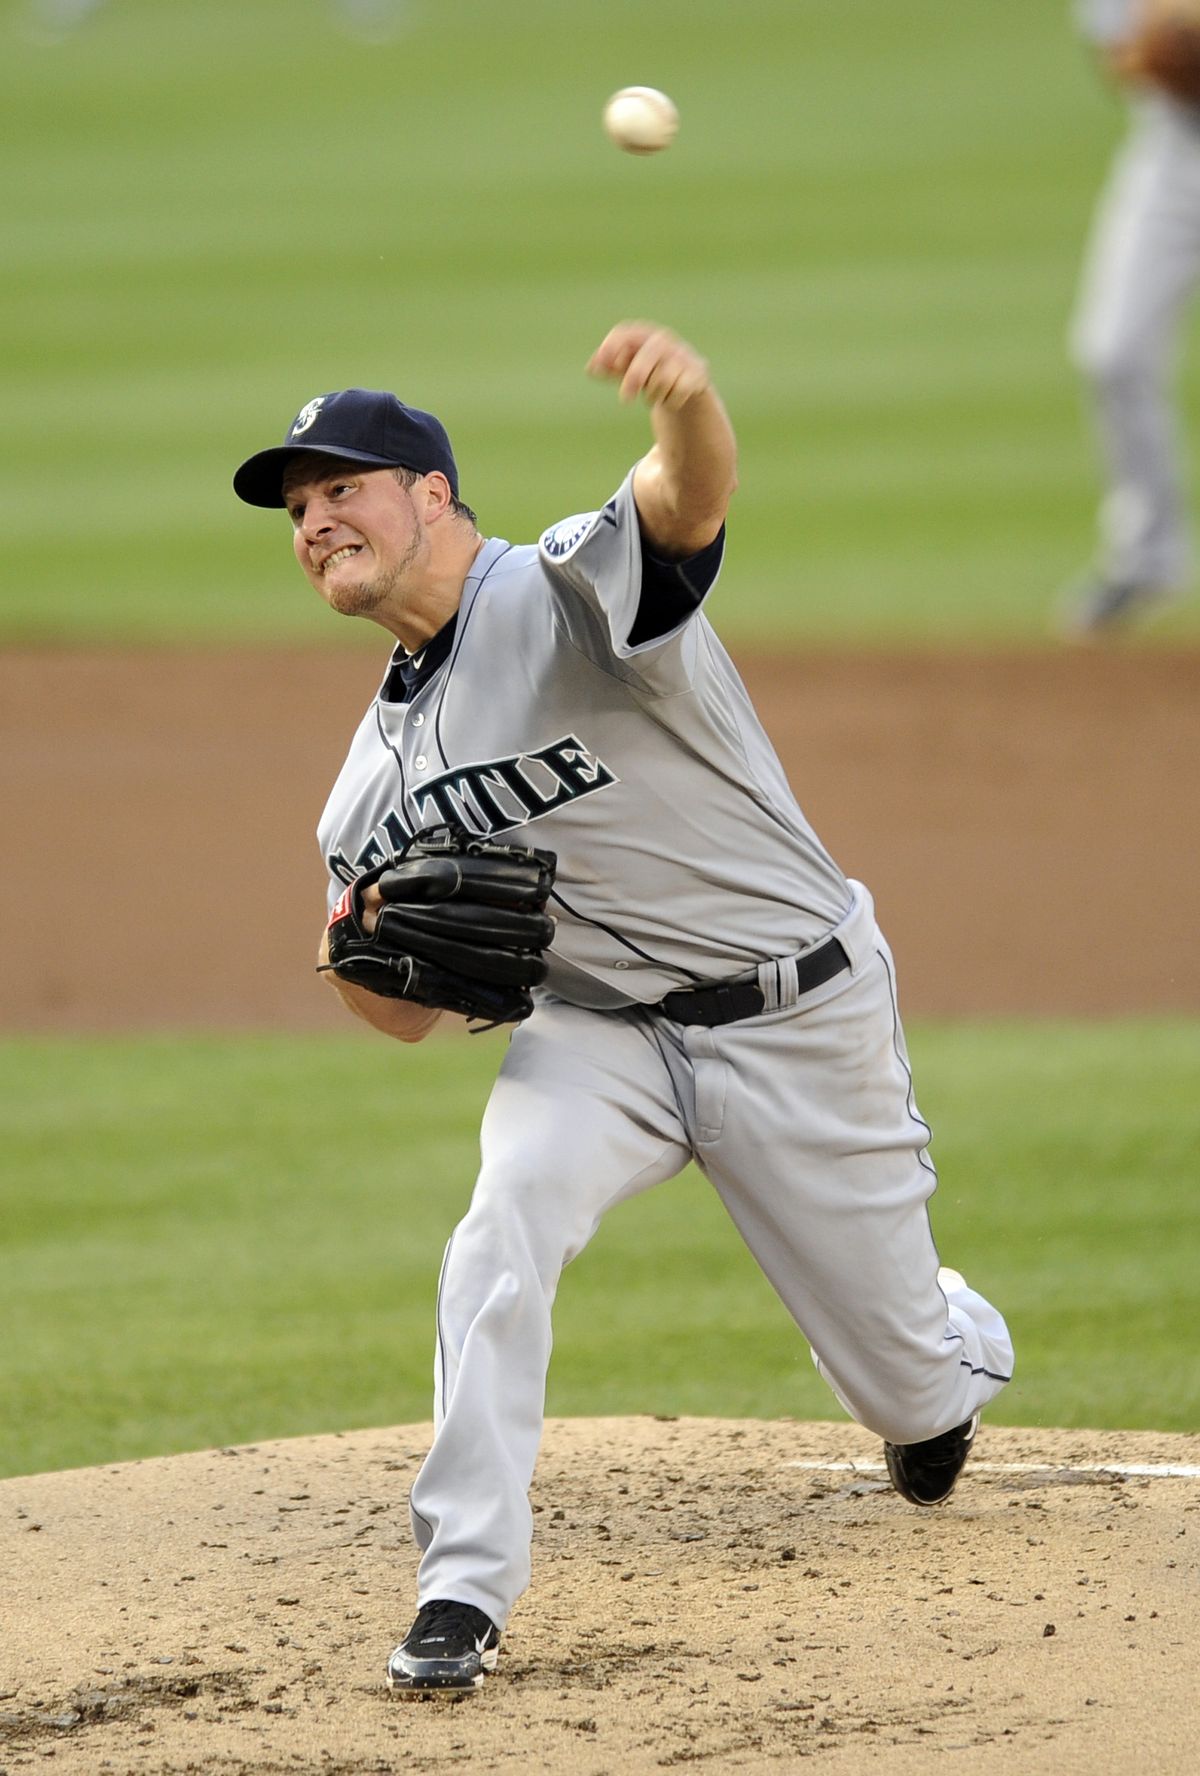 Seattle Mariners starting pitcher Erik Bedard delivers a pitch against the Washington Nationals during the third inning of an interleague baseball game, Wednesday, June 22, 2011, in Washington. (Nick Wass / Associated Press)